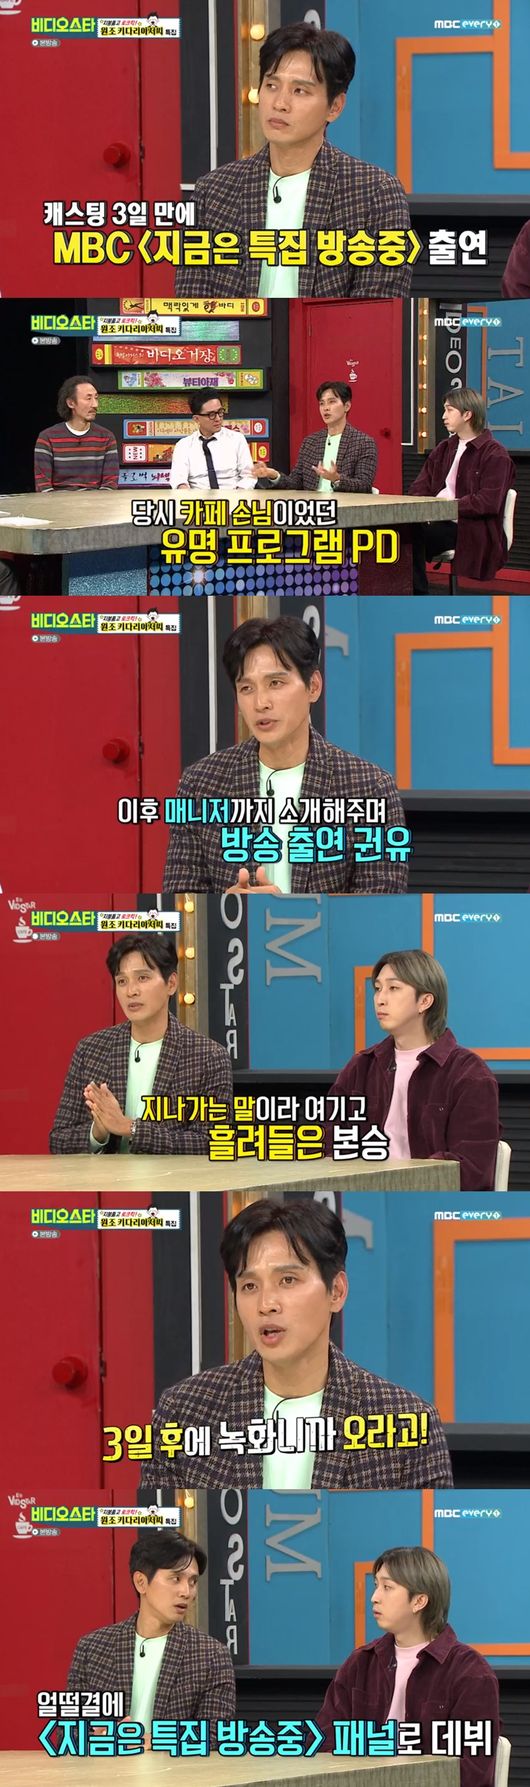 Goo Bon-seung talked about his past work at Cafe with Jung Woo-sung.MBC every1 Video Star broadcast on the 25th roof high lock kick!Goo Bon-seung talked about his past Leeds days while being decorated with an original Kidari special feature.Park said, Goo Bon-seung was cast while working as a Cafe part-time job. The part-time student who worked together was Jung Woo-sung and clinical student.That was when Cafe Manager was Jung Woo-sung, and then a year later, a clinical child came in, Goo Bon-seung said. Its gone now.Shim Sin asked, Was not that Cafe name Laguna? So Goo Bon-seung said, At that time, Shim Sin was a regular.There are a lot of celebrities, he said, drawing attention.Goo Bon-seung said, One day I got a call from Cafe, and PD told me to come back to the recording three days later.It was a program called Now Im on a special broadcast, he said.Goo Bon-seung said, I did not do well from the beginning. Then I entered the program Today is a good day and acted with Kang Ho-dong.It was a villain that Hodong was harassing his brother, he said.In the performance of Goo Bon-seung, Kim Hee-sun danced to the flute accompaniment played by Goo Bon-seung and made the surrounding sea laughing.Goo Bon-seung also attracted attention by saying, I can not see it when I watched the drama Lancaster General Hospital which was very popular as an actor.Its so embarrassing, Goo Bon-seung said.Kim Sook asked, Did you prepare the actor first or the singer first?Goo Bon-seung said, I was preparing for the record when I was playing Lancaster General Hospital.After Lancaster General Hospital, the response was good, so the album came out immediately.Goo Bon-seung brought up a story about his past illegitimate fans: I came home and went in for a shower, but I saw a human face in the small window of the bathroom.I was so surprised that I went into another room and there were people outside at that time. Everyone goes through it if theyre popular, but there were many days when fans kept pressing the doorbell and my mom was sleeping in the car, which was so sorry, Goo Bon-seung said.On this day, Goo Bon-seung said, It was the most ridiculous thing to say that I was excited about the rumors surrounding him. I do not do love because of unhappiness.Goo Bon-seung laughed, suggesting, If there are many good people, why do not you come and try it?MBCevery1 Video Star broadcast capture